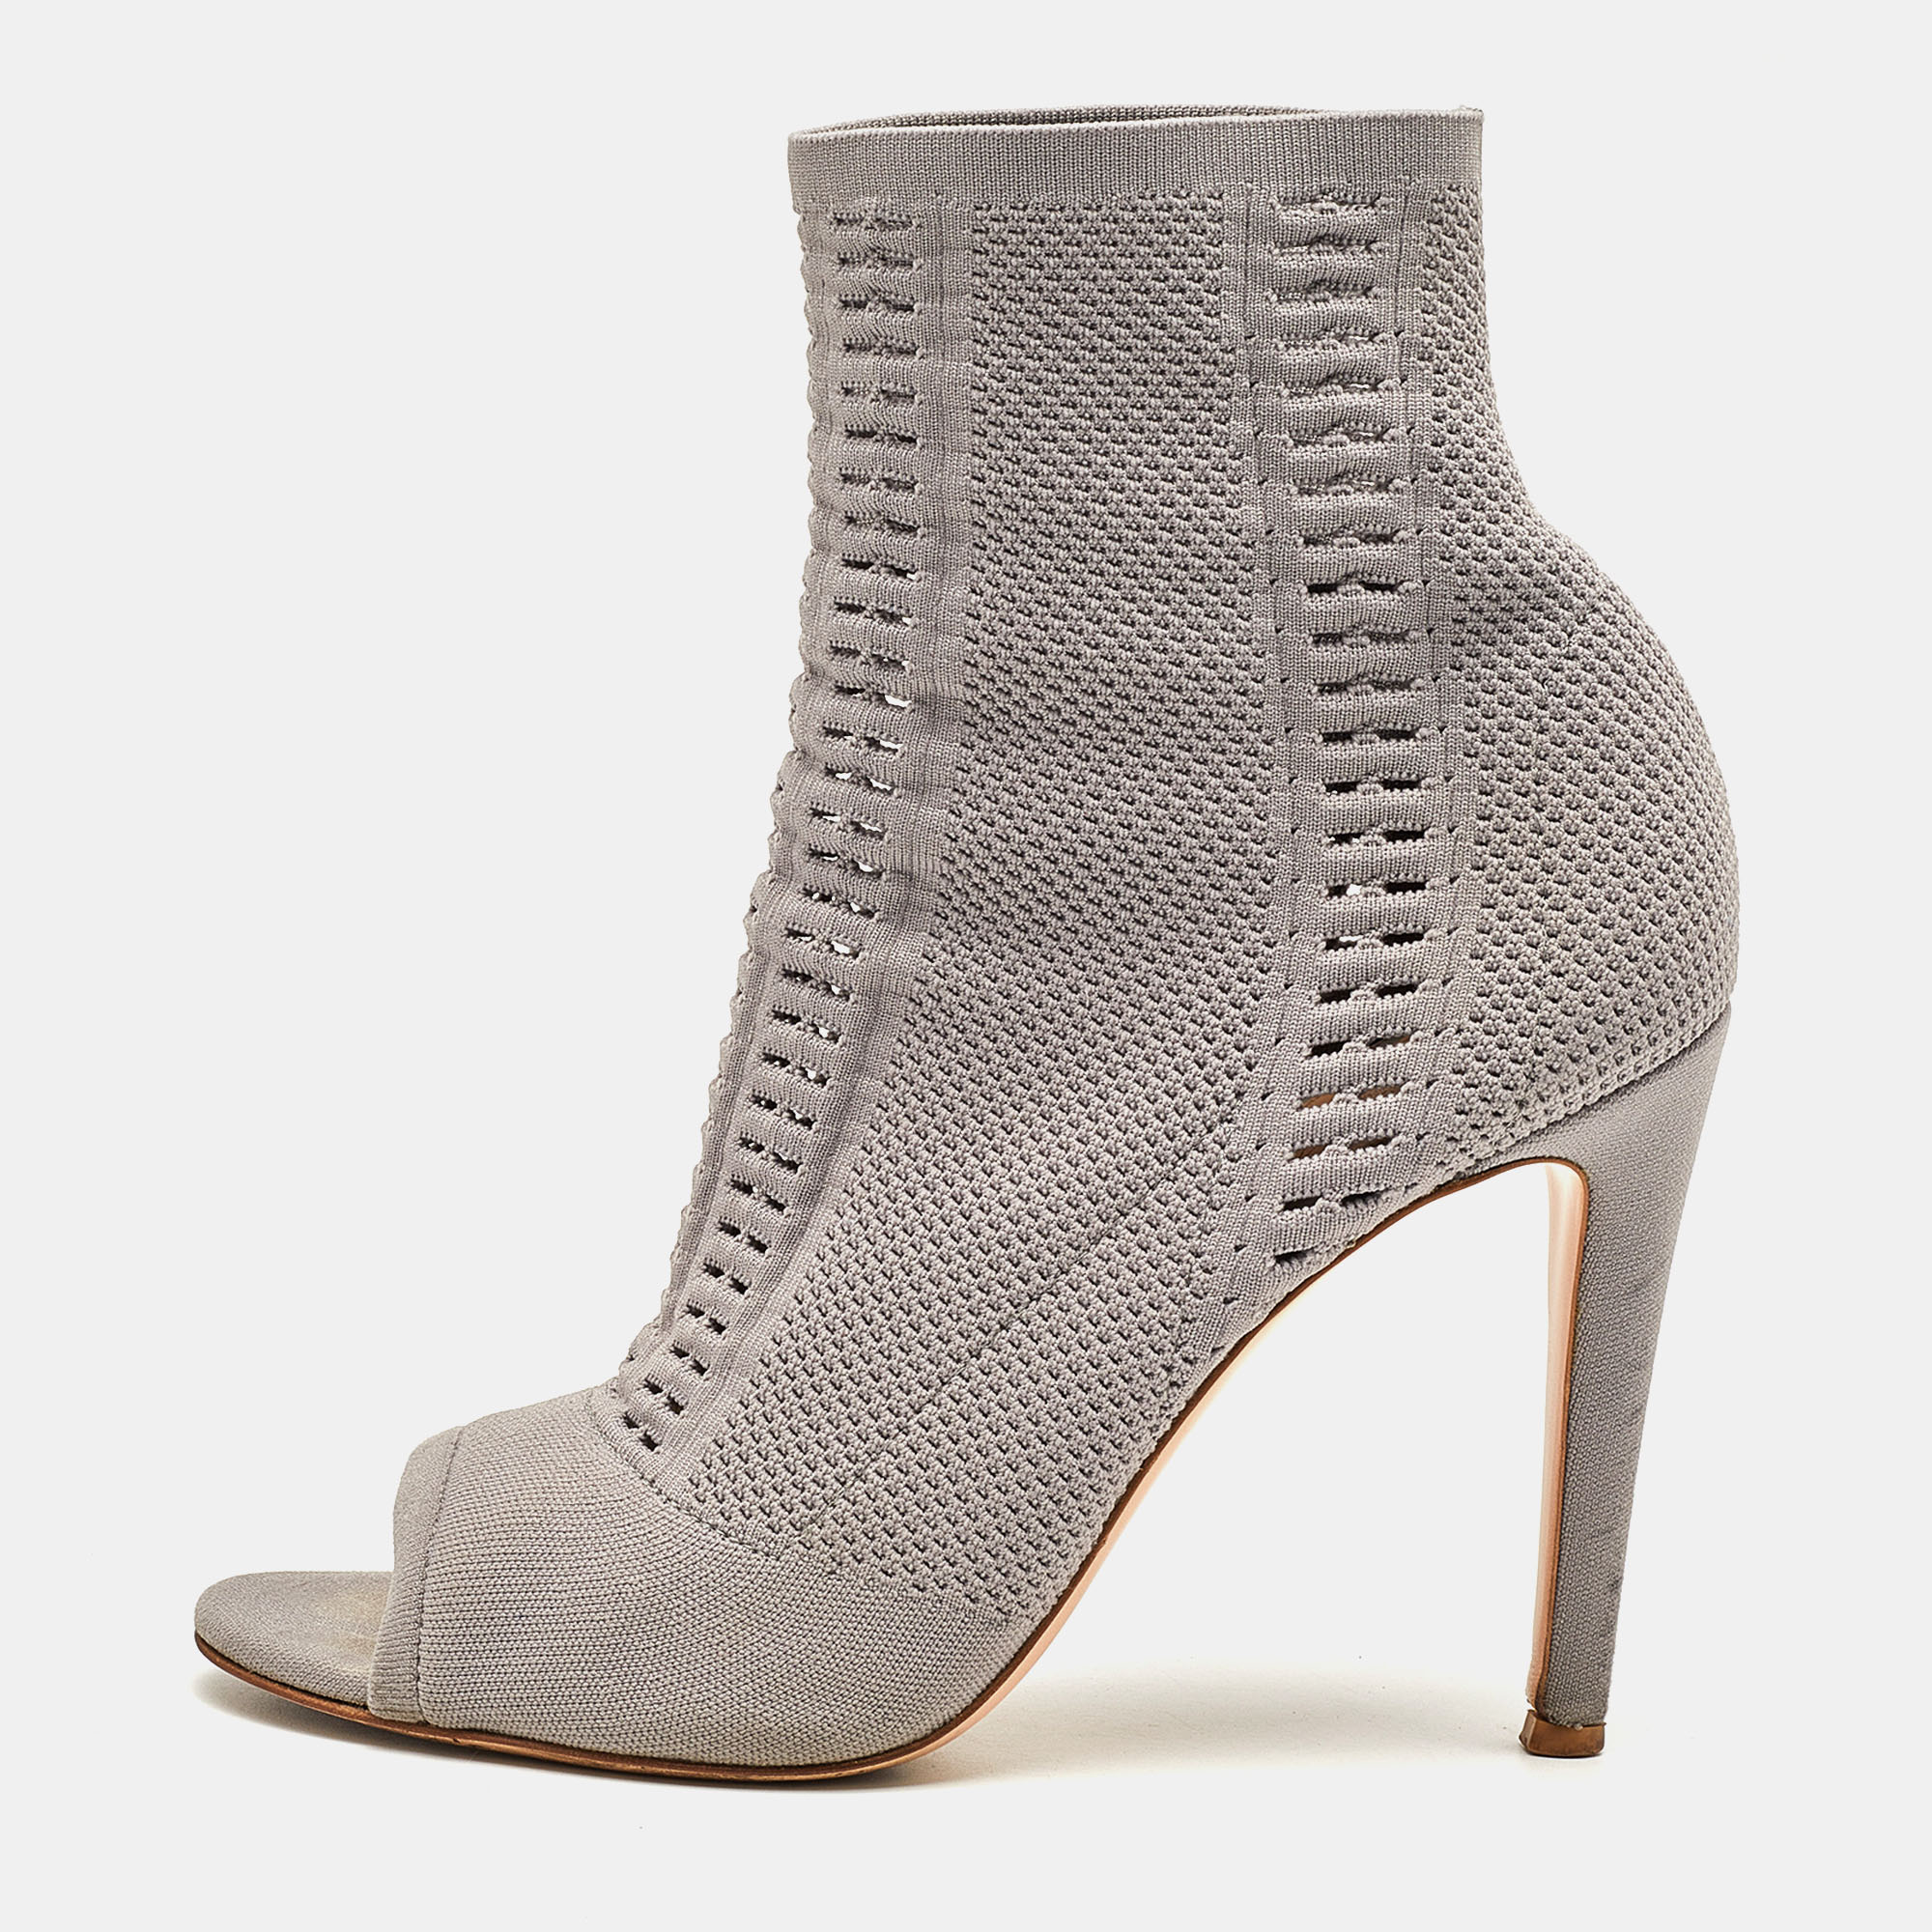 Gianvito Rossi Grey Knit Fabric Vires Ankle Booties Size 40.5